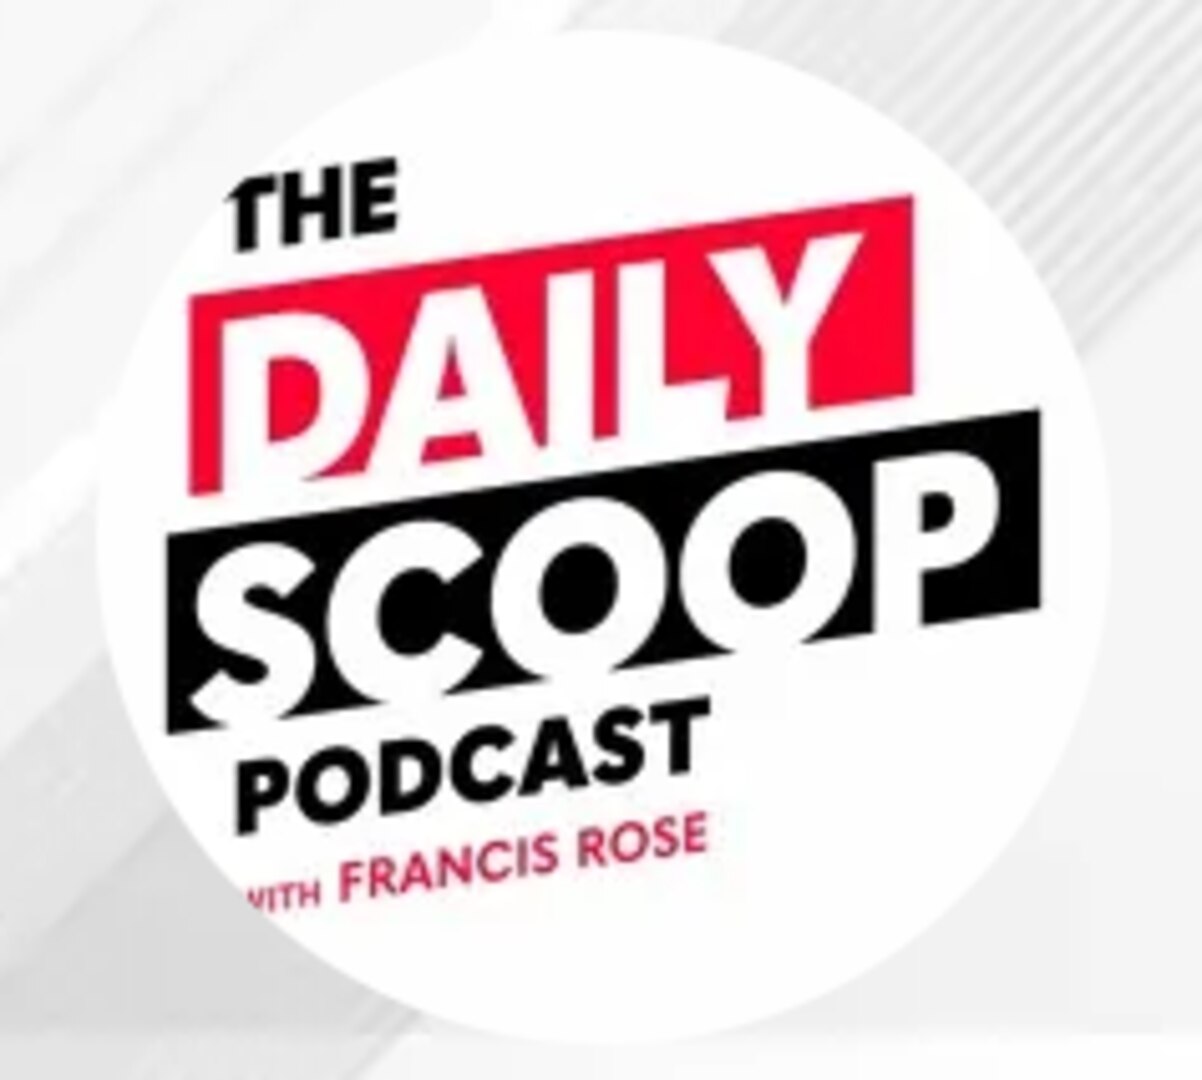 The Daily Scoop Podcast with Francis Rose logo from fedscoop.com